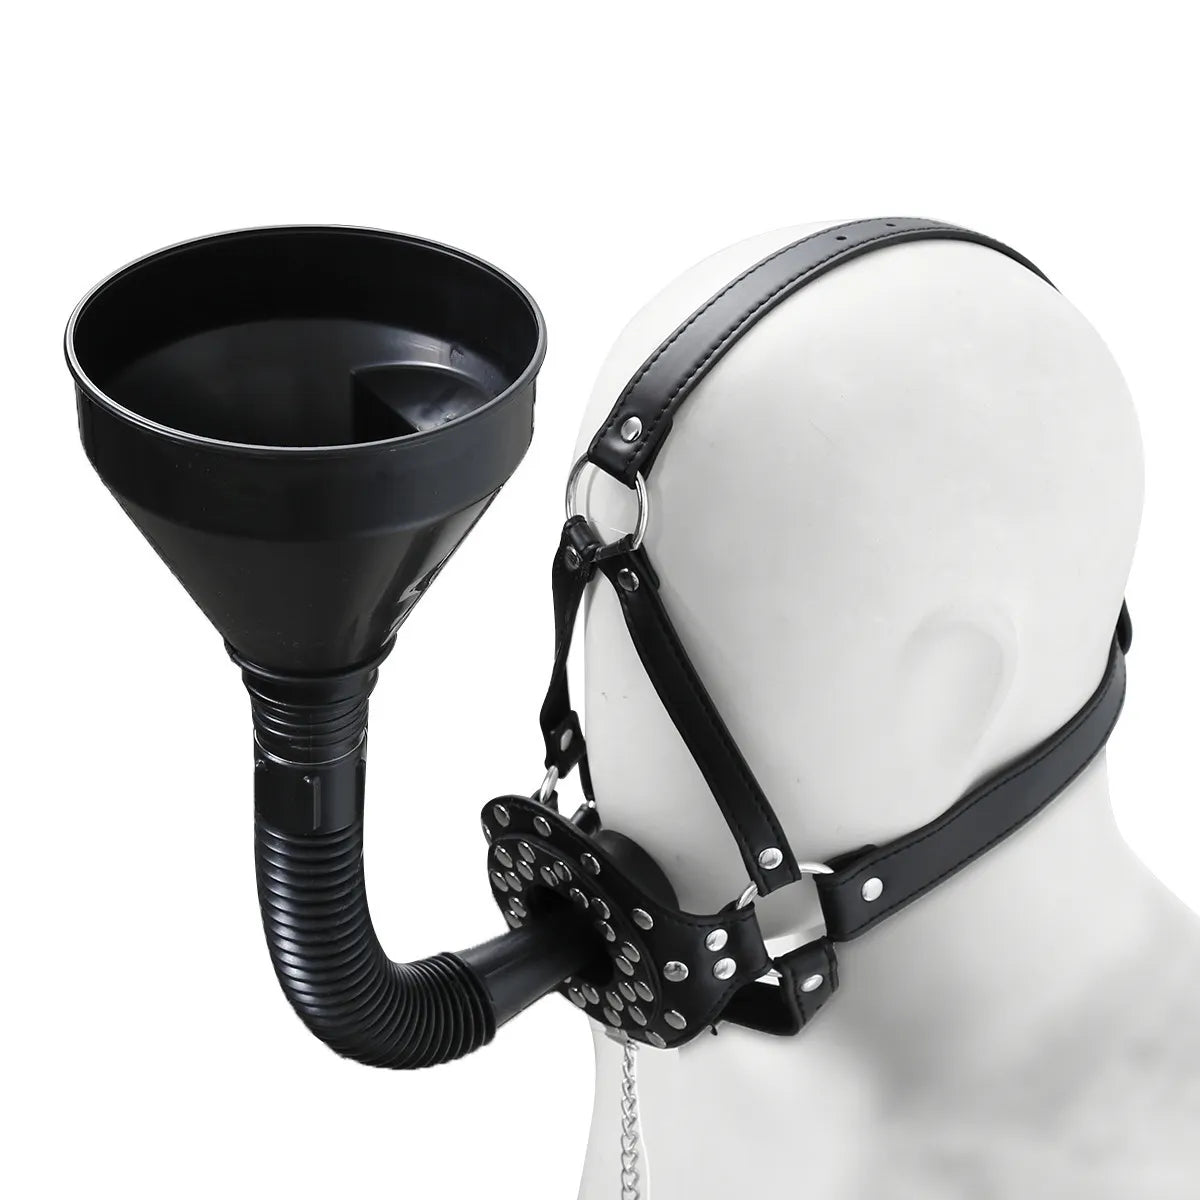 Nxy Sm Bondage Sm Toys Funnel Mouth Enema Sex For Woman Gag Leather Binding  Adult Slave Games Bdsm Tools 220423 From Buttplugs, $12.7